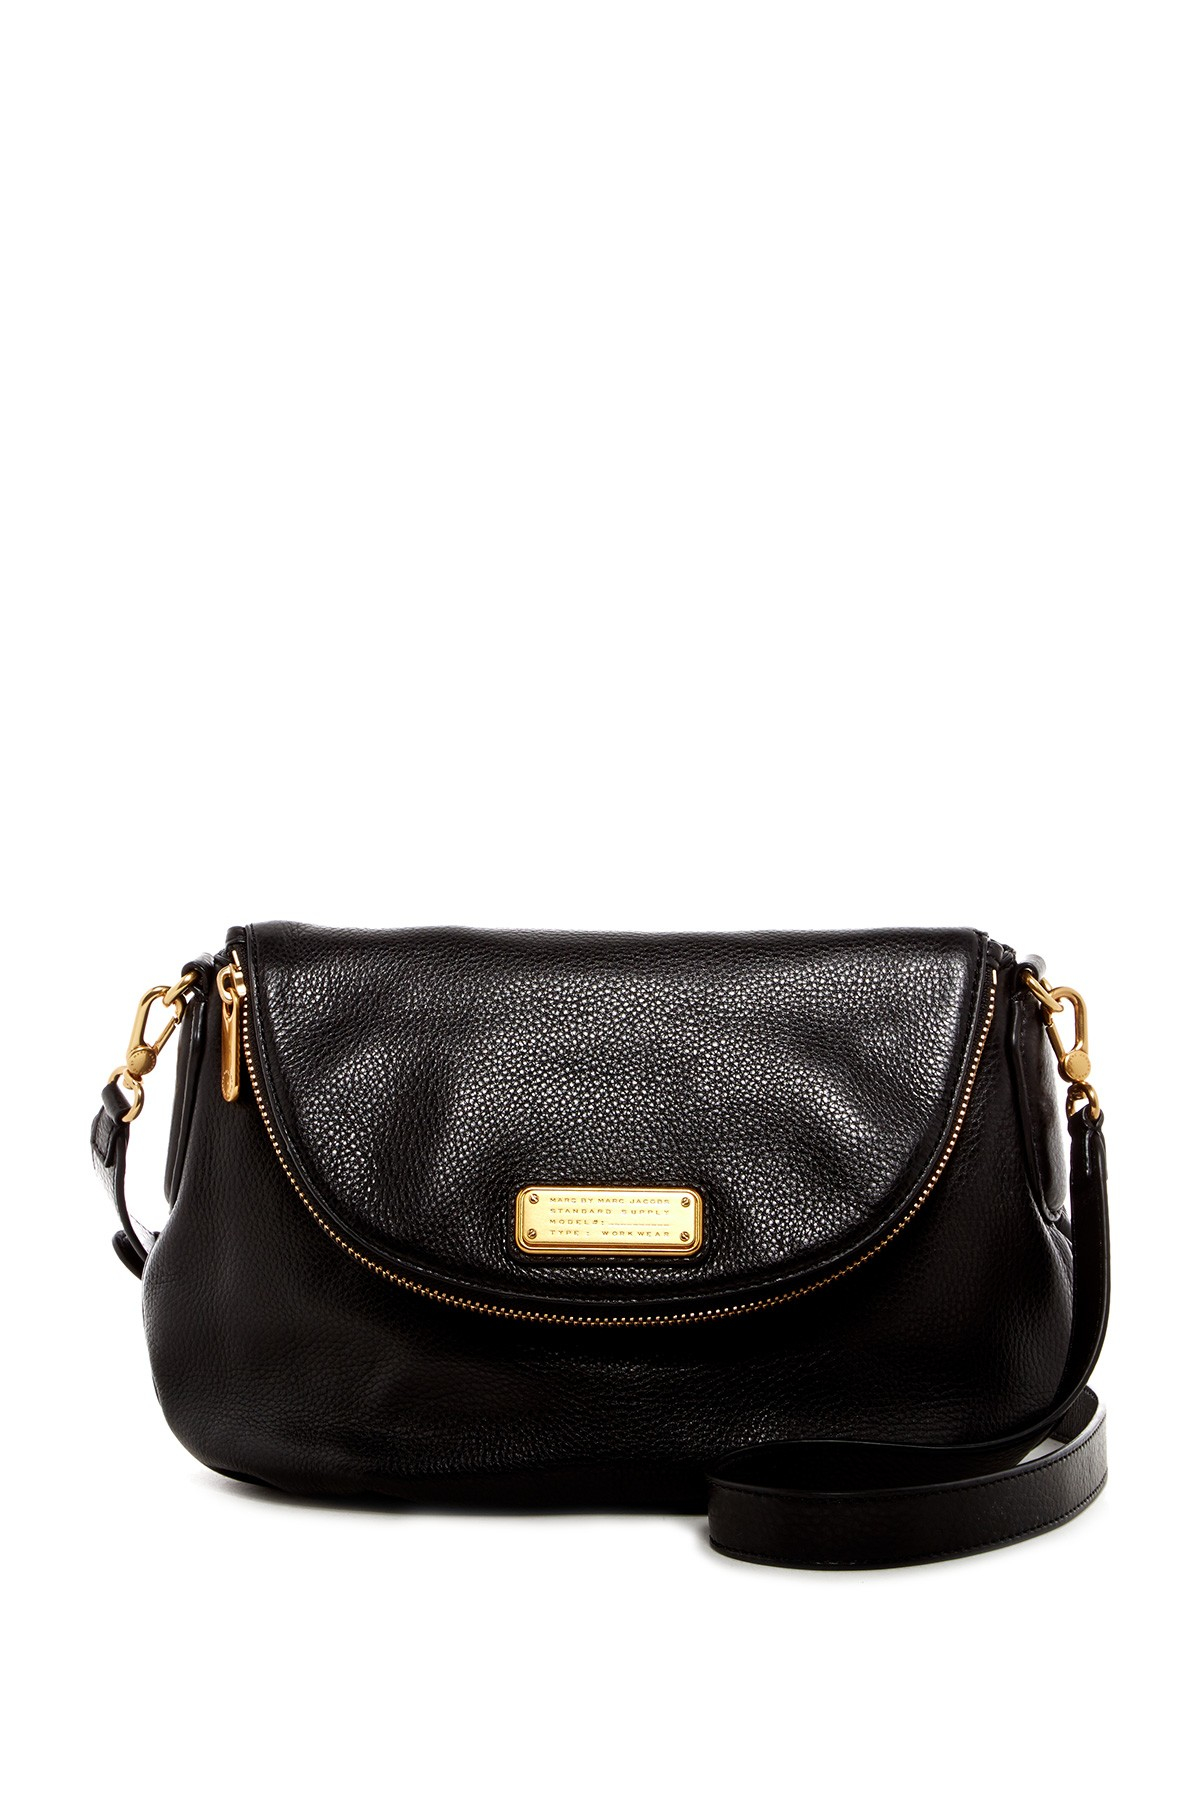 Marc by marc jacobs New Q Natasha Leather Crossbody Bag in Black - Save 50% | Lyst